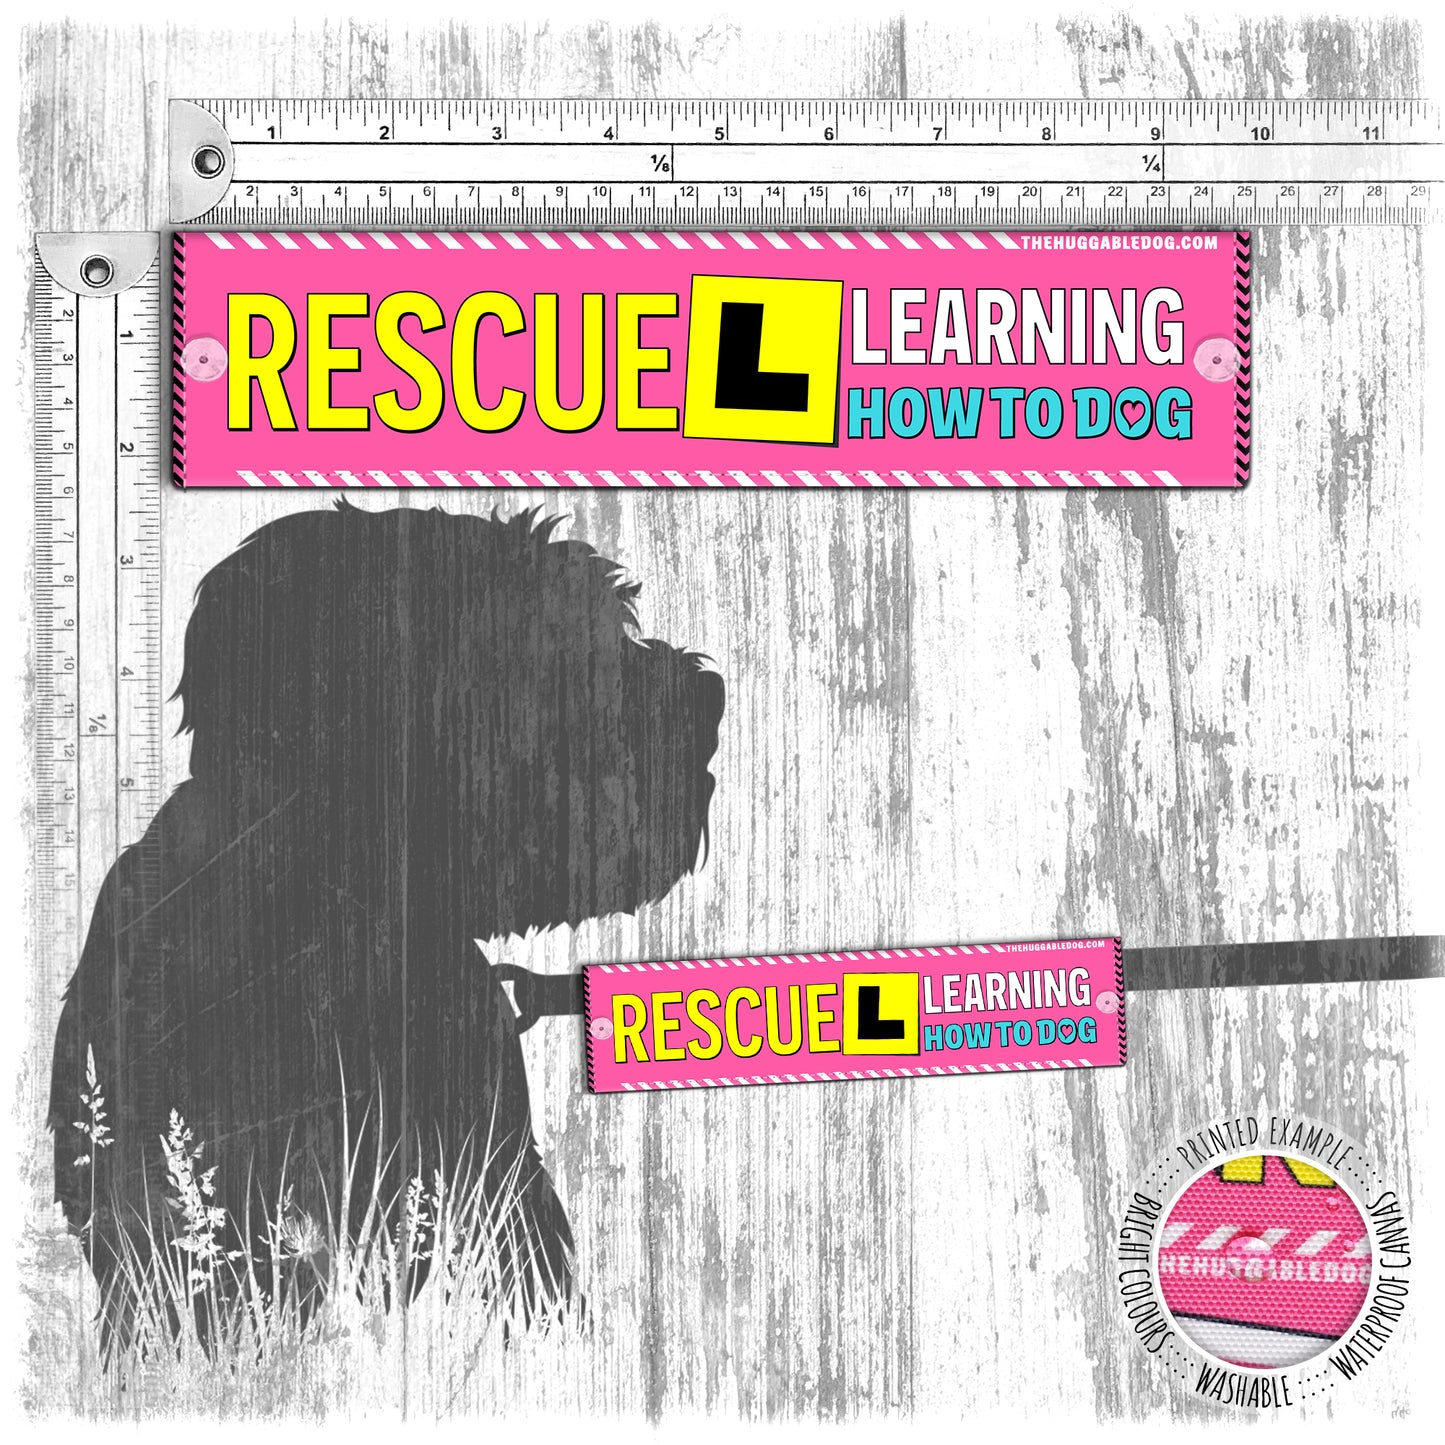 "Rescue LEARNING how to dog". Leash sleeve for dogs.